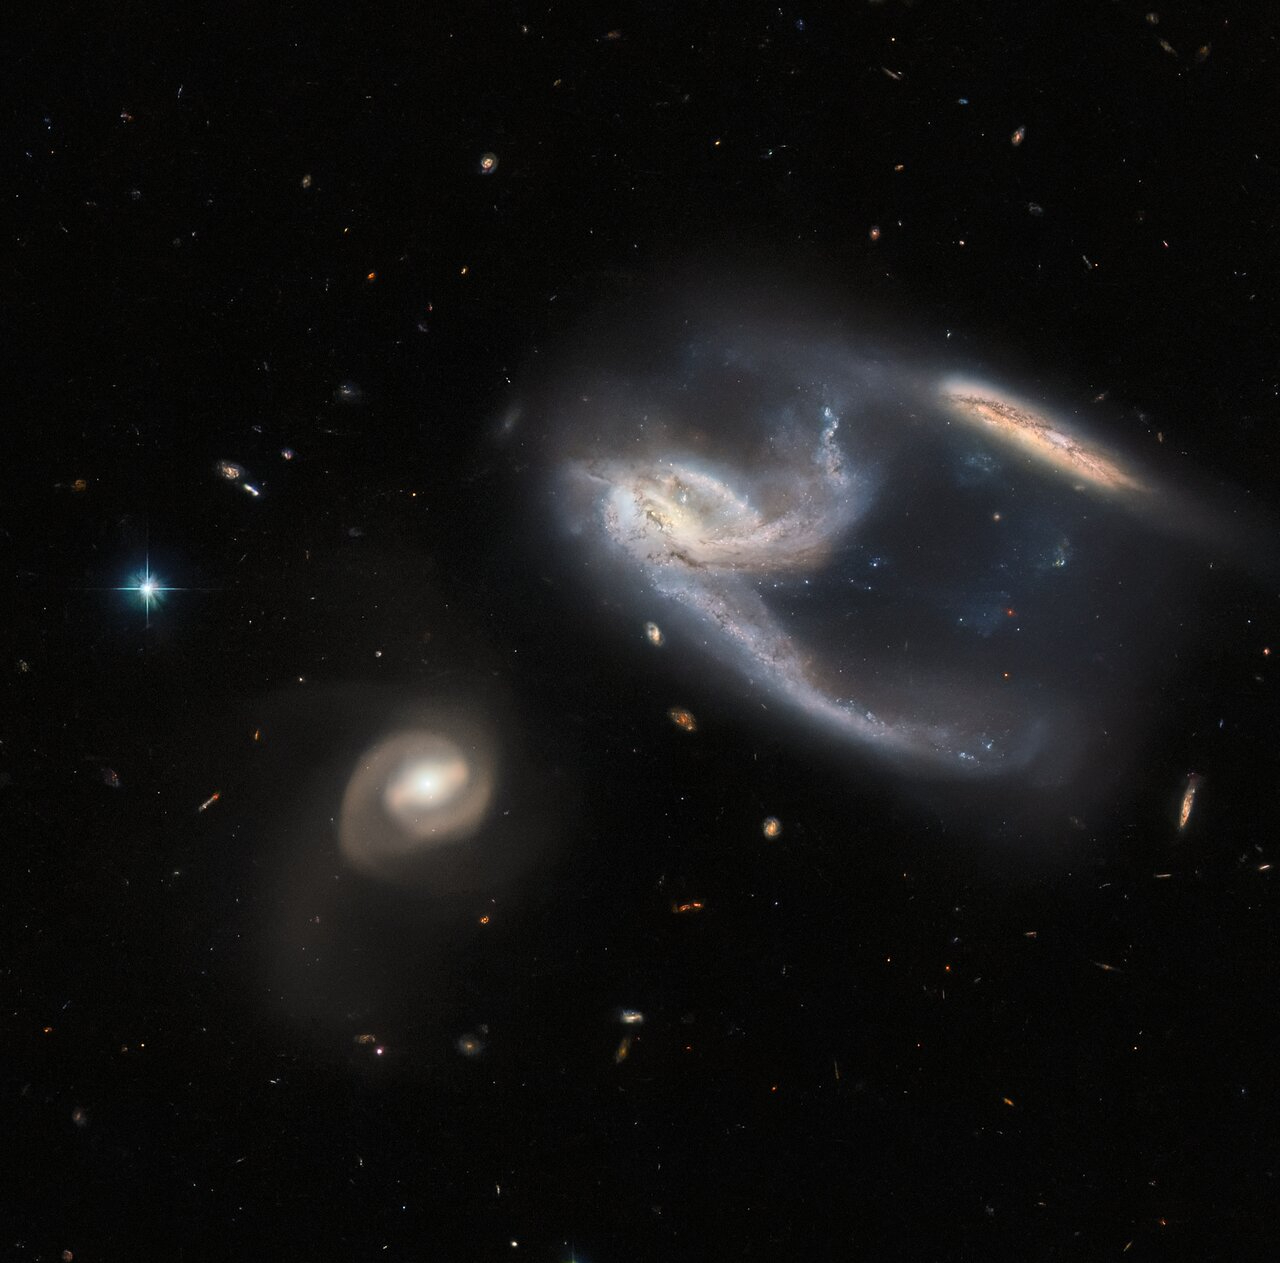 Galaxies appear to be interacting with one another in image captured by Hubble